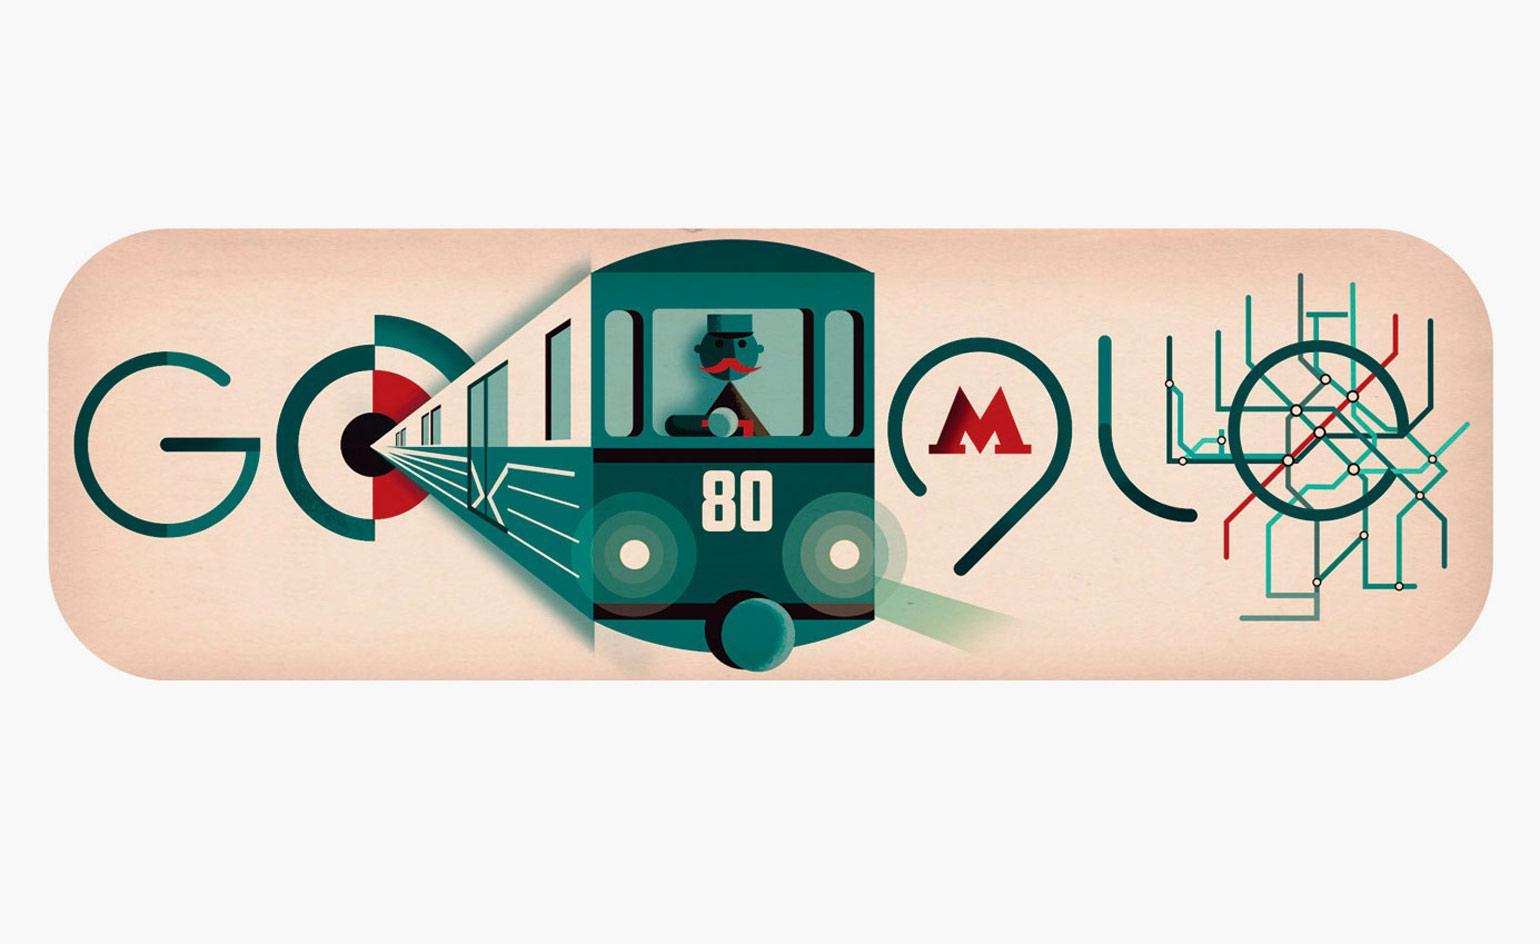 Top Google Doodles of all time. Wallpaper*